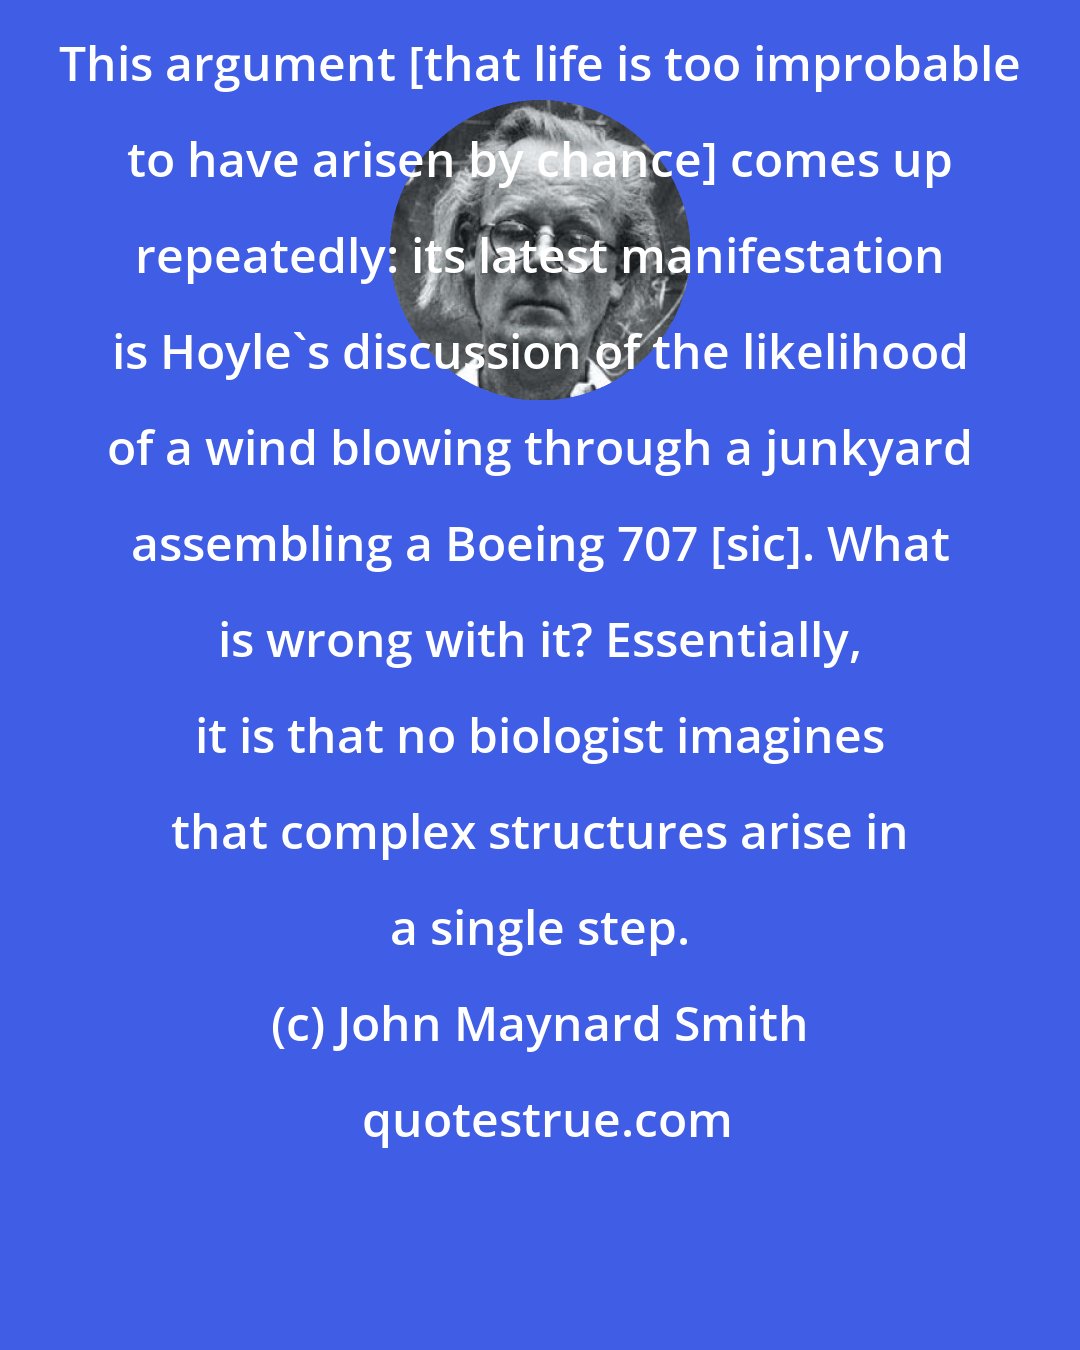 John Maynard Smith: This argument [that life is too improbable to have arisen by chance] comes up repeatedly: its latest manifestation is Hoyle's discussion of the likelihood of a wind blowing through a junkyard assembling a Boeing 707 [sic]. What is wrong with it? Essentially, it is that no biologist imagines that complex structures arise in a single step.